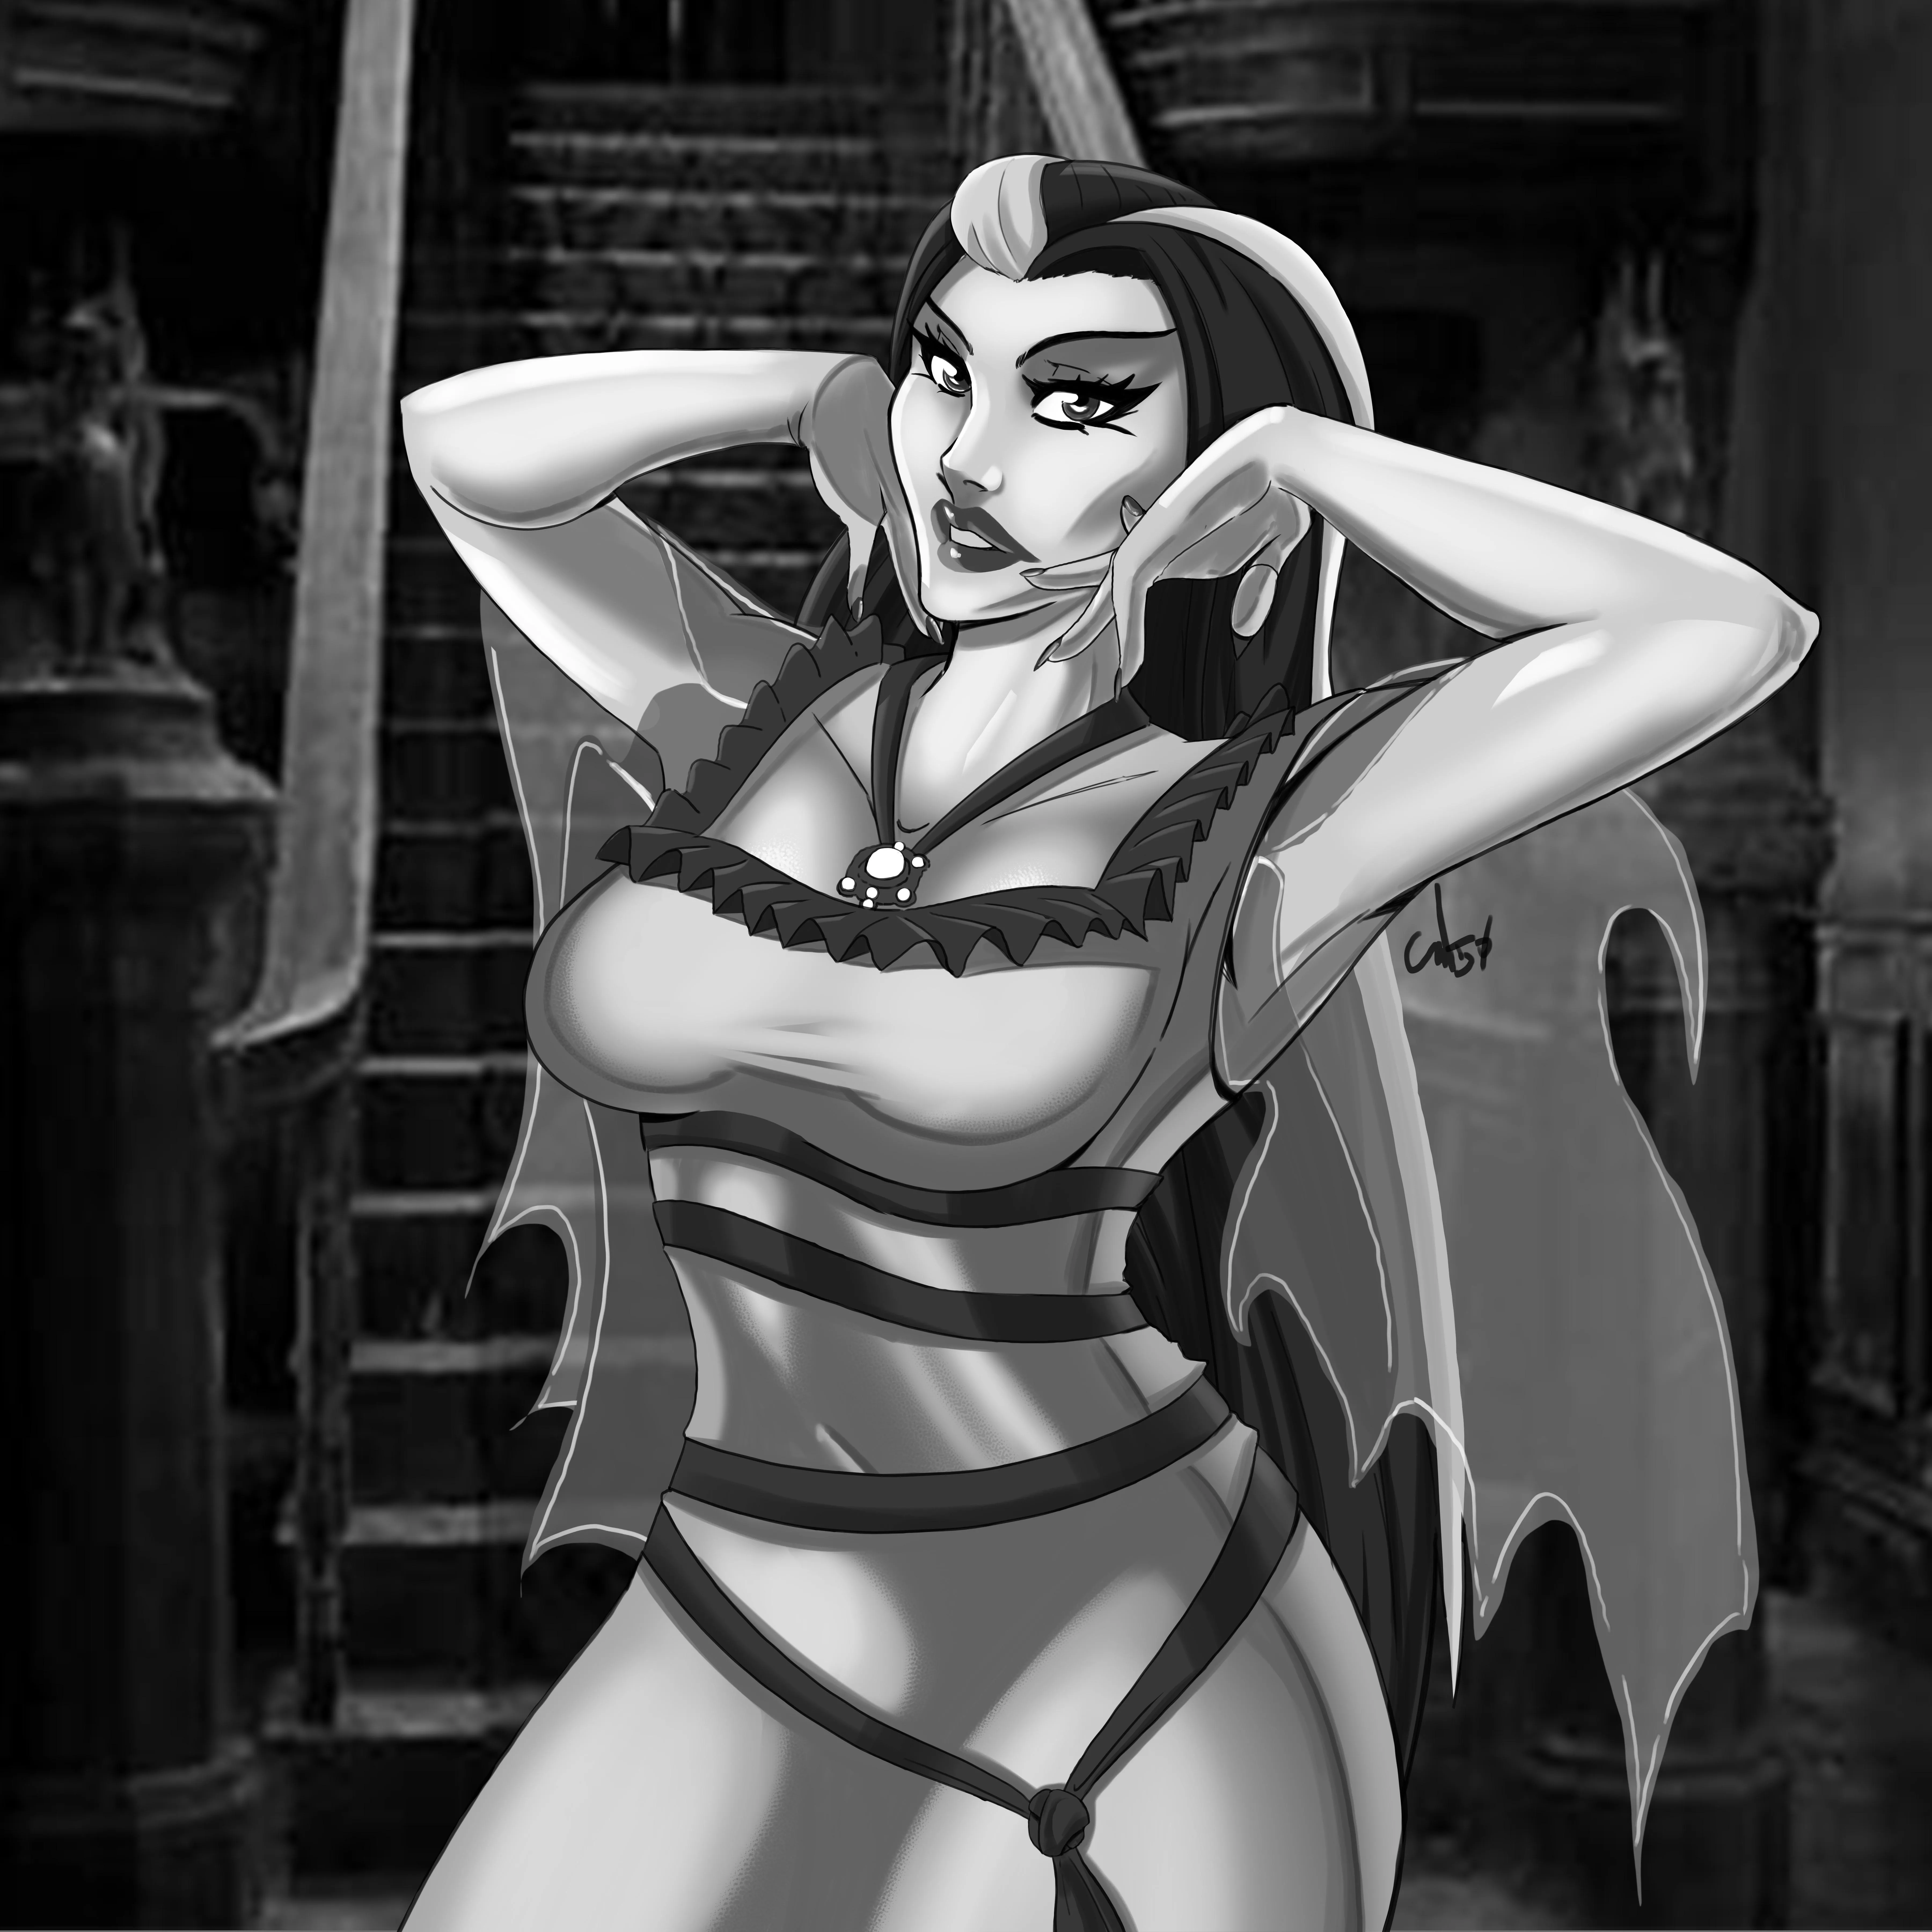 The Munsters Porn - Lily Munster from 'The Munsters' by FiftyCalvinArt nudes : ImaginaryBoners  | NUDE-PICS.ORG